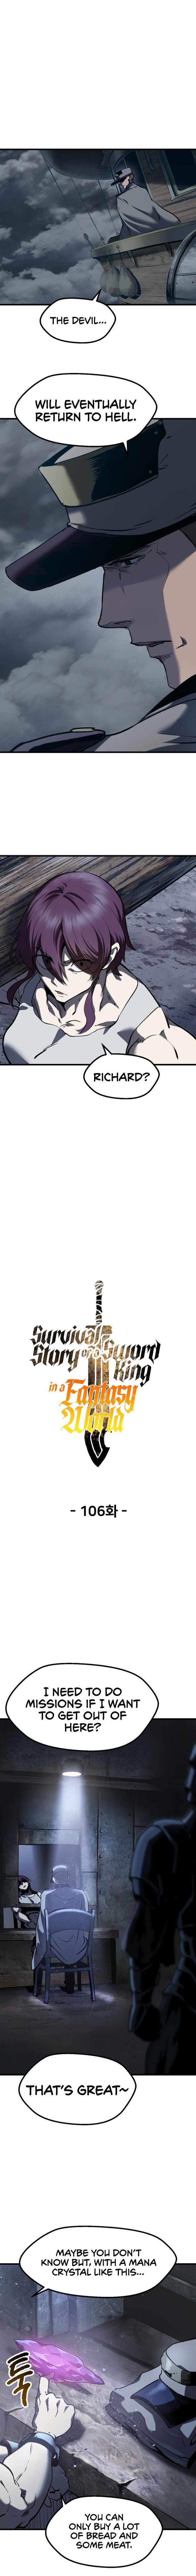 Survival Story Of A Sword King In A Fantasy World 106 9